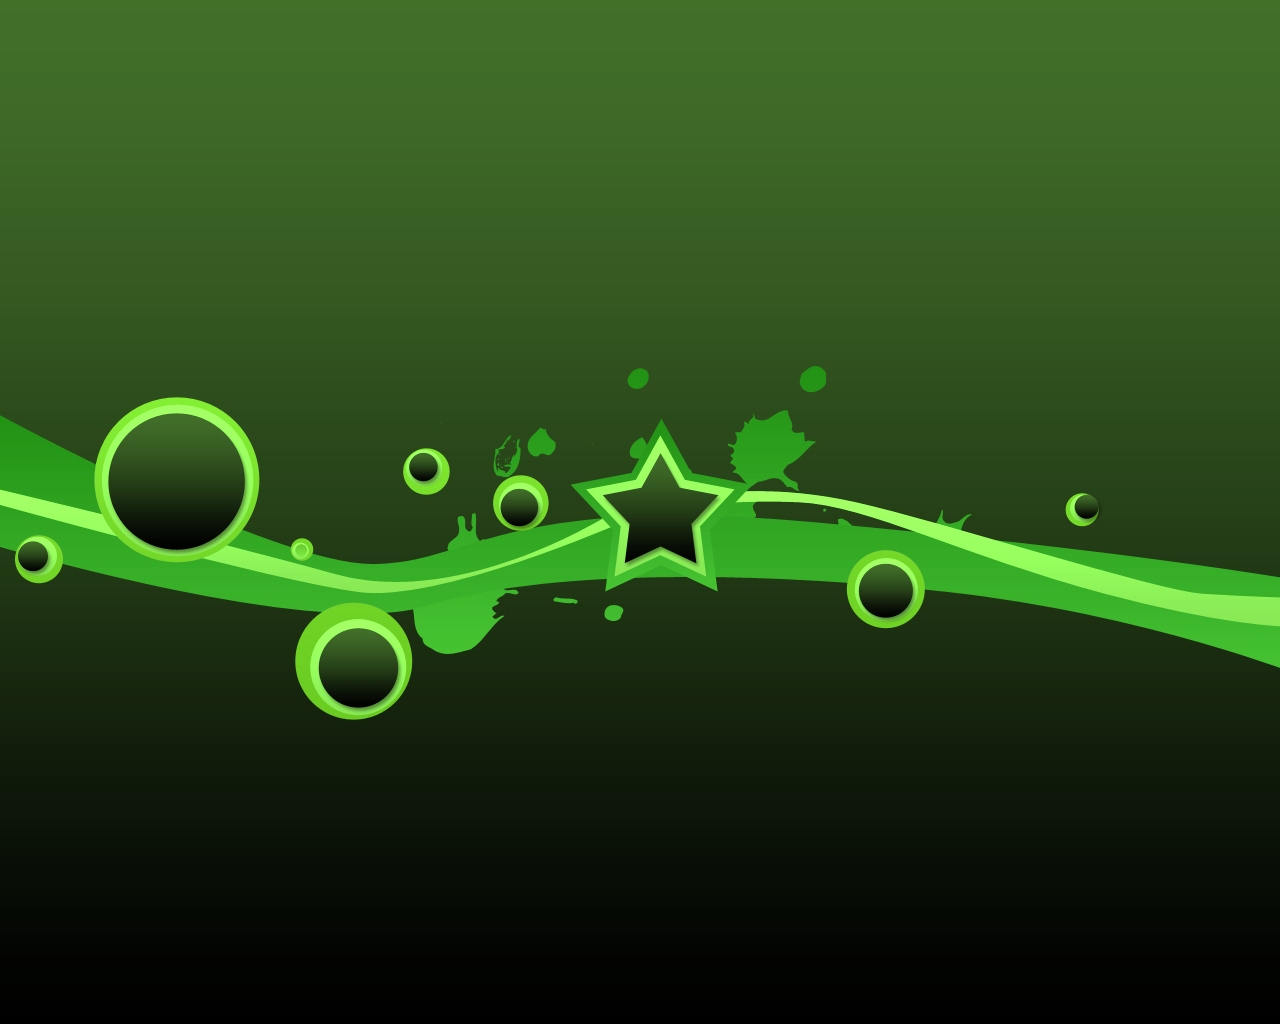 Animated Green Stars backgrounds